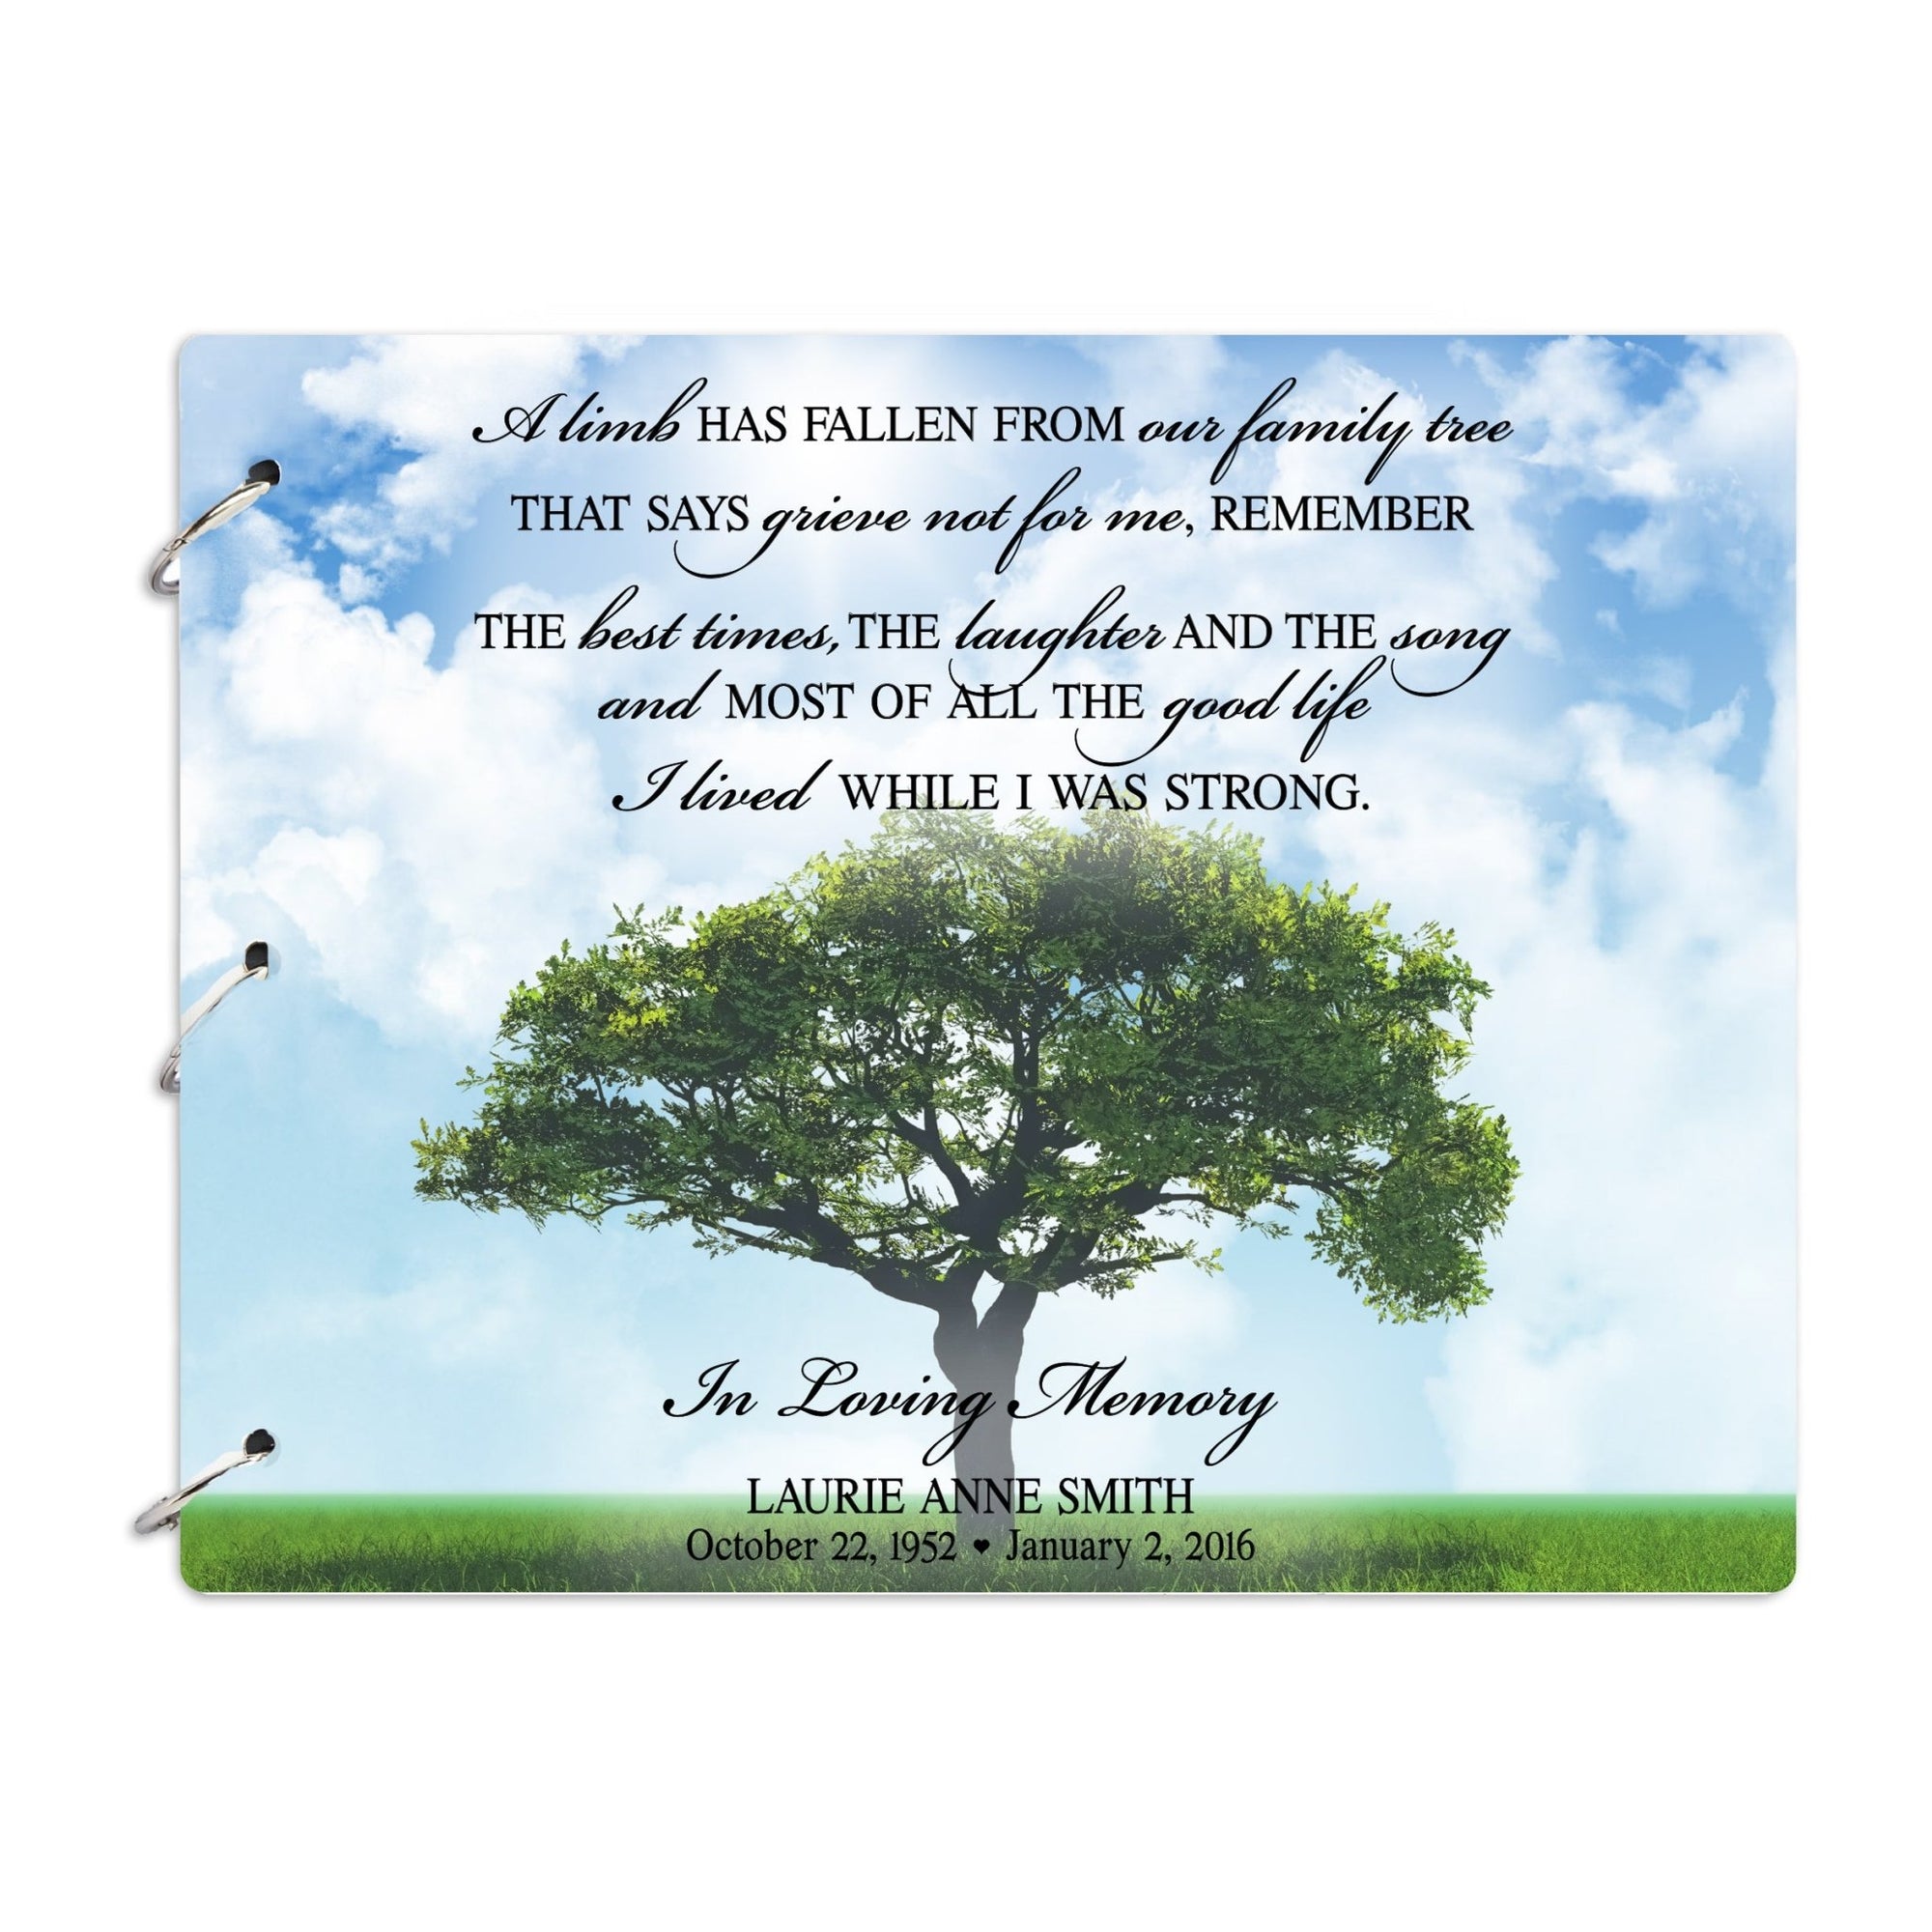 Personalized Wooden Funeral Service Guest Book - A Limb Has Fallen - LifeSong Milestones